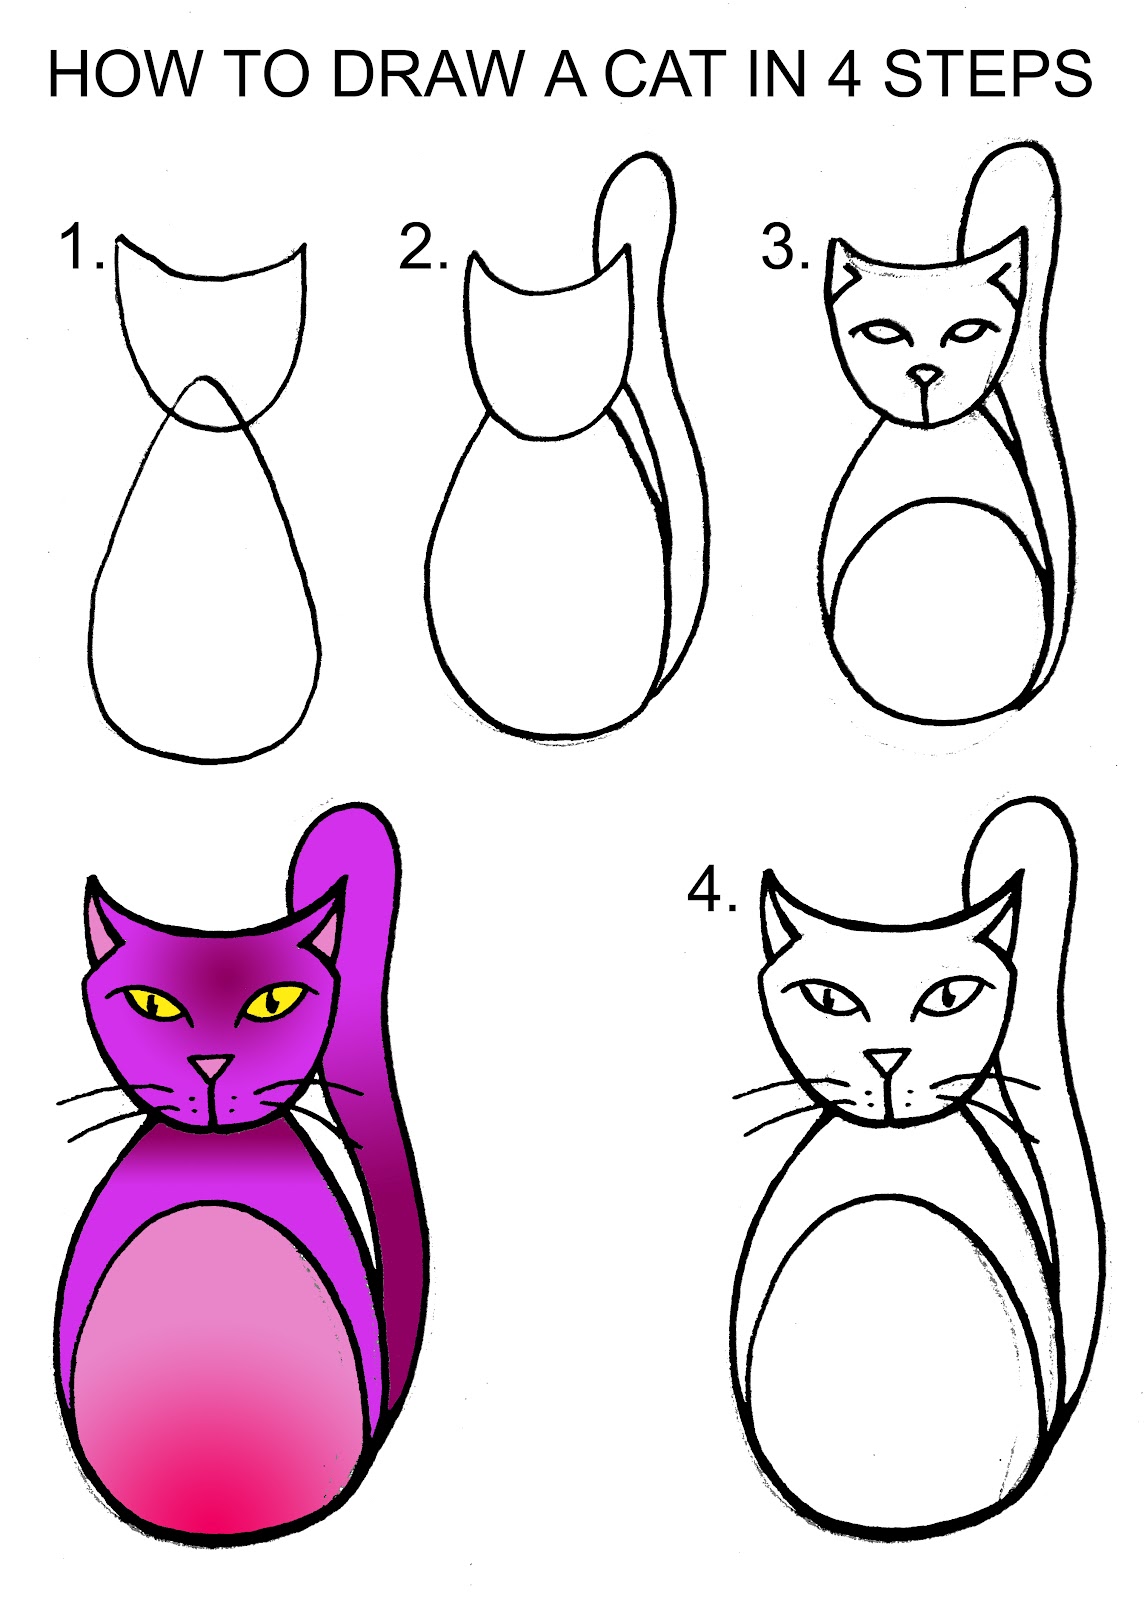 DARYL HOBSON ARTWORK: How To Draw A Cat Step By Step